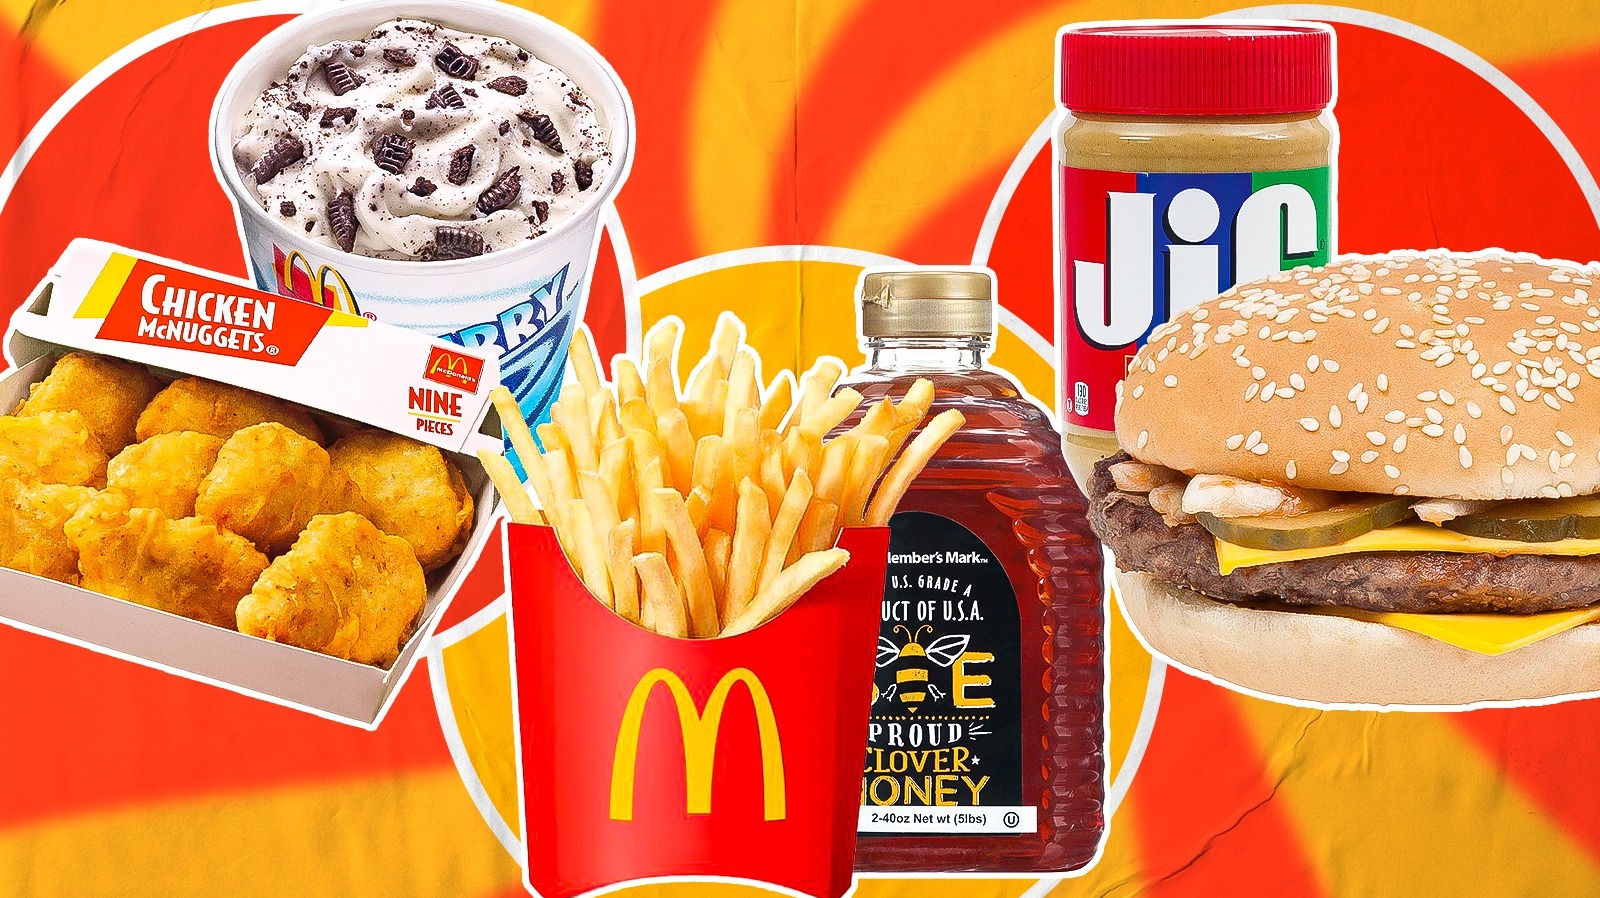 We Tried 12 OutOfTheBox McDonald's Combinations